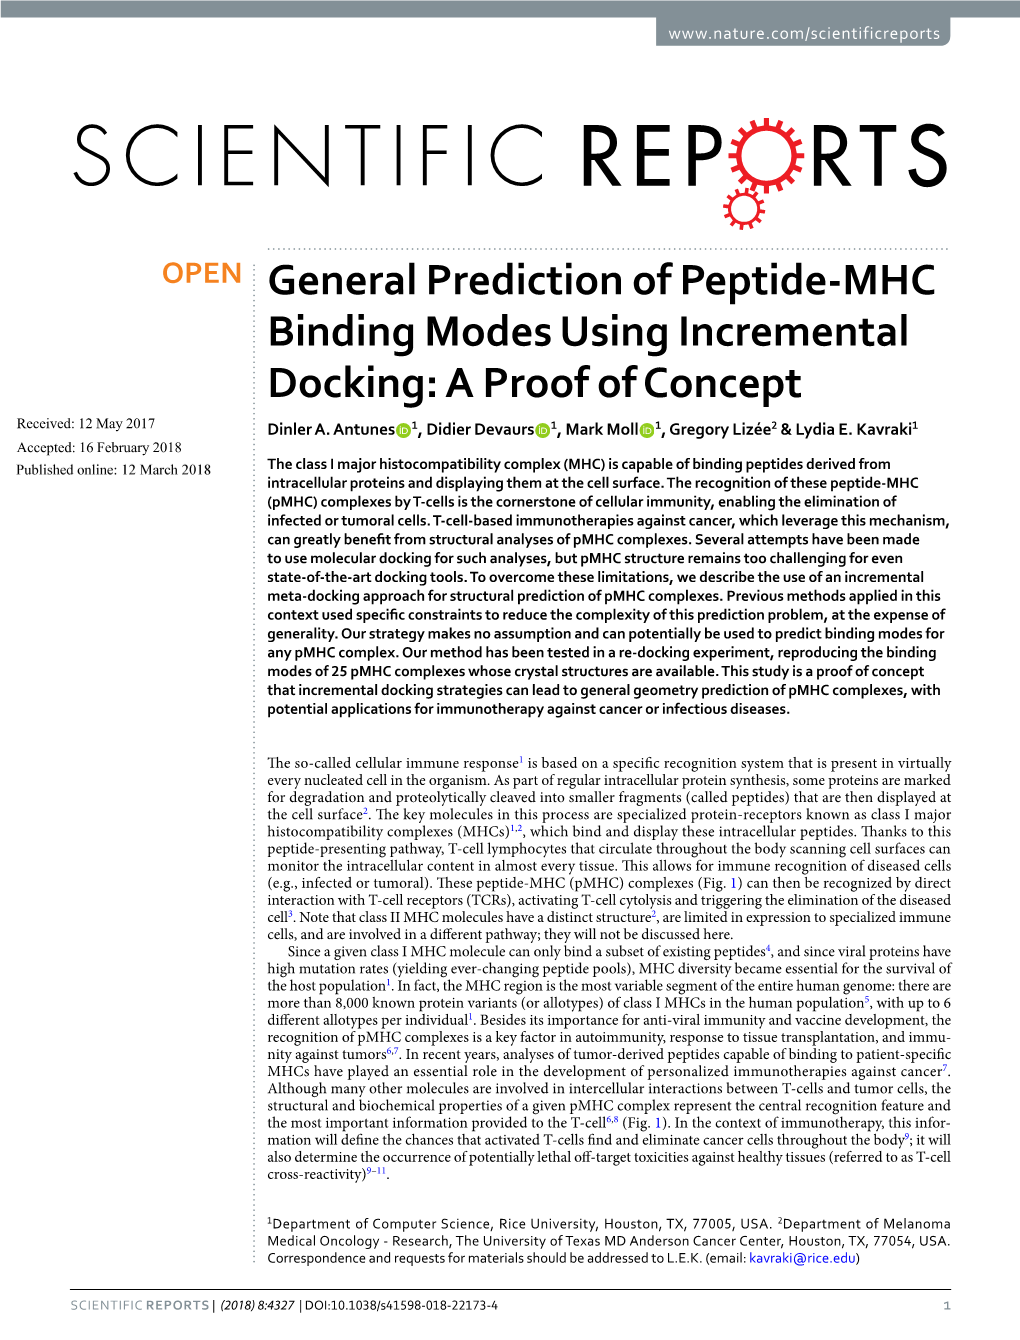 General Prediction of Peptide-MHC Binding Modes Using Incremental Docking: a Proof of Concept Received: 12 May 2017 Dinler A